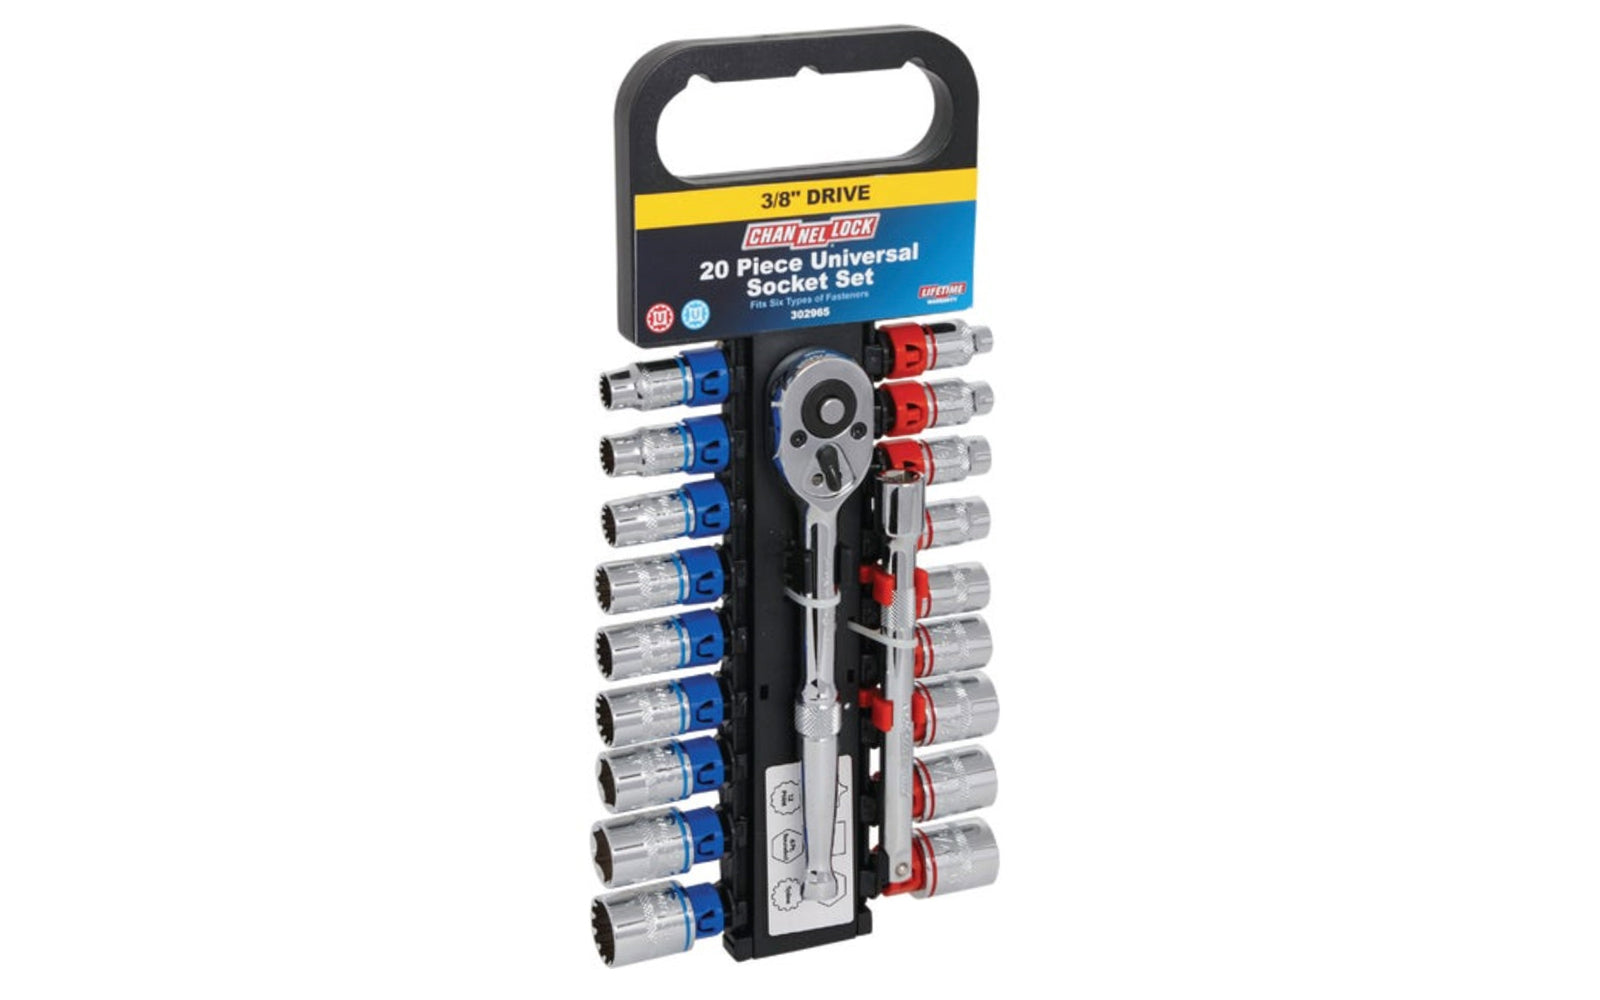 Channellock 20 PC 3/8" DR Universal Socket Set. Universal socket set. Use with E-Torx, Square, 6 Point, 12 Point, 6 Point Rounded, and Spline fasteners. Model 302965.  009326332901. 20 piece channelock ratchet socket set.